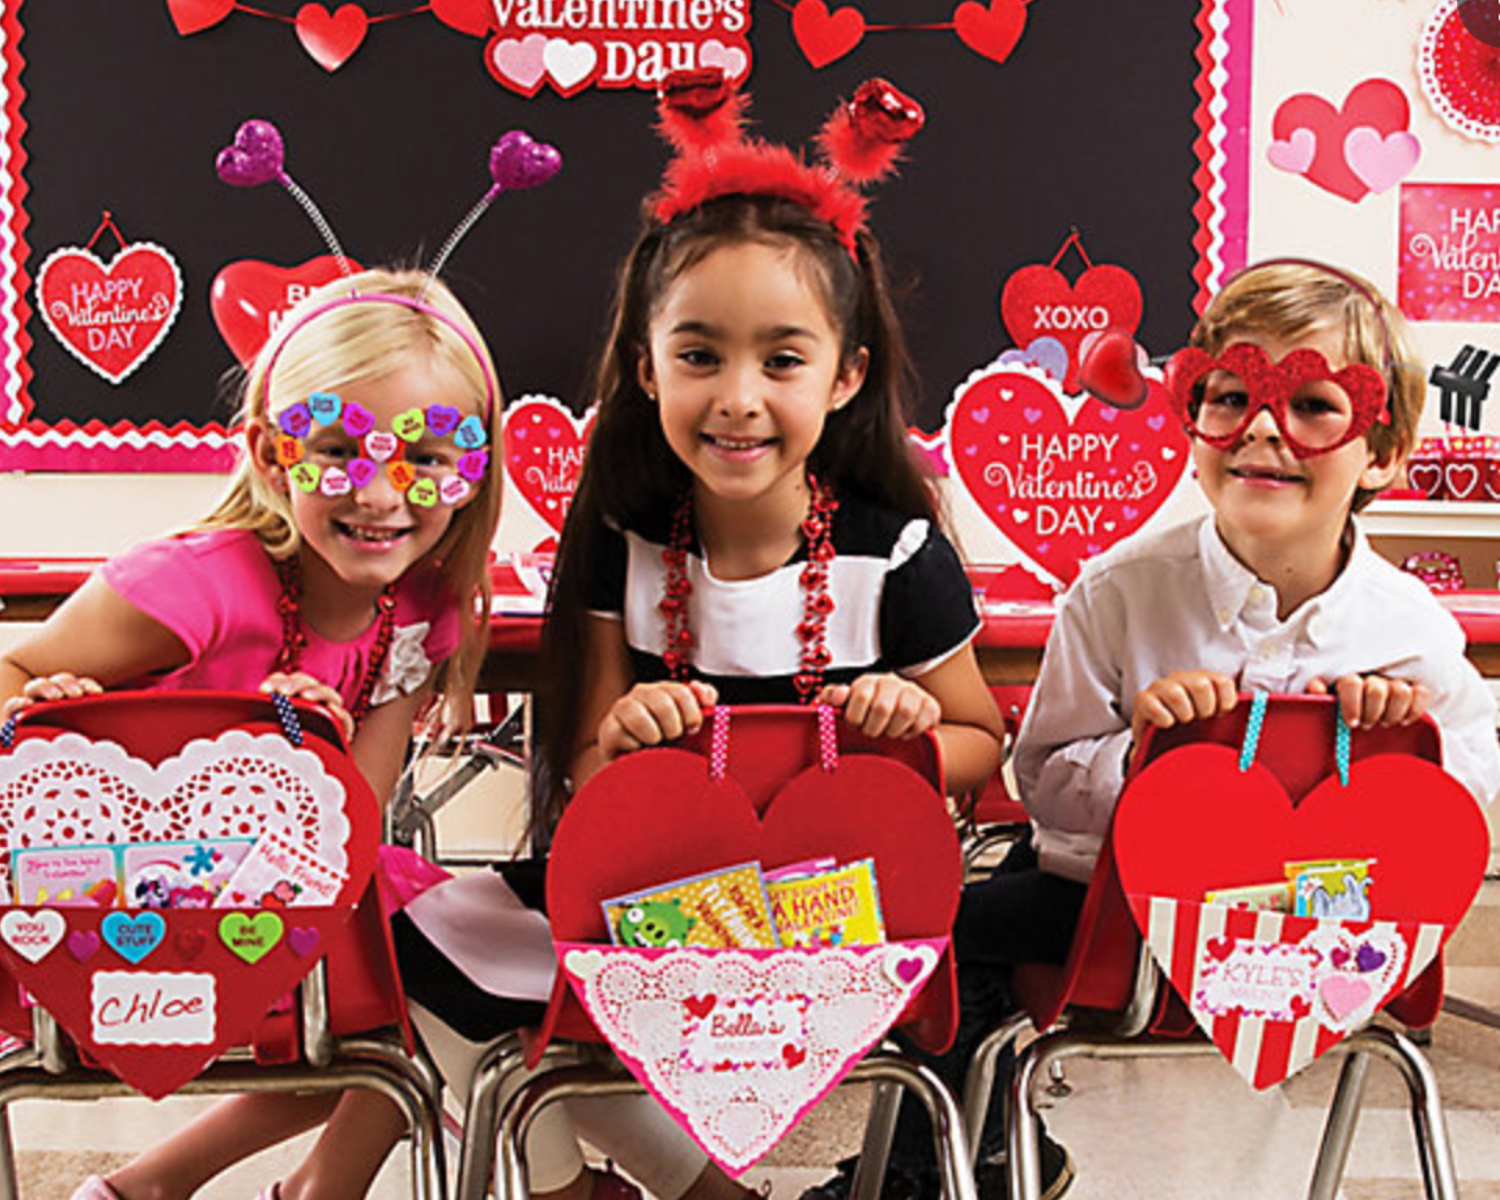 Valentine's Day Class Party Ideas - Joy in the Works